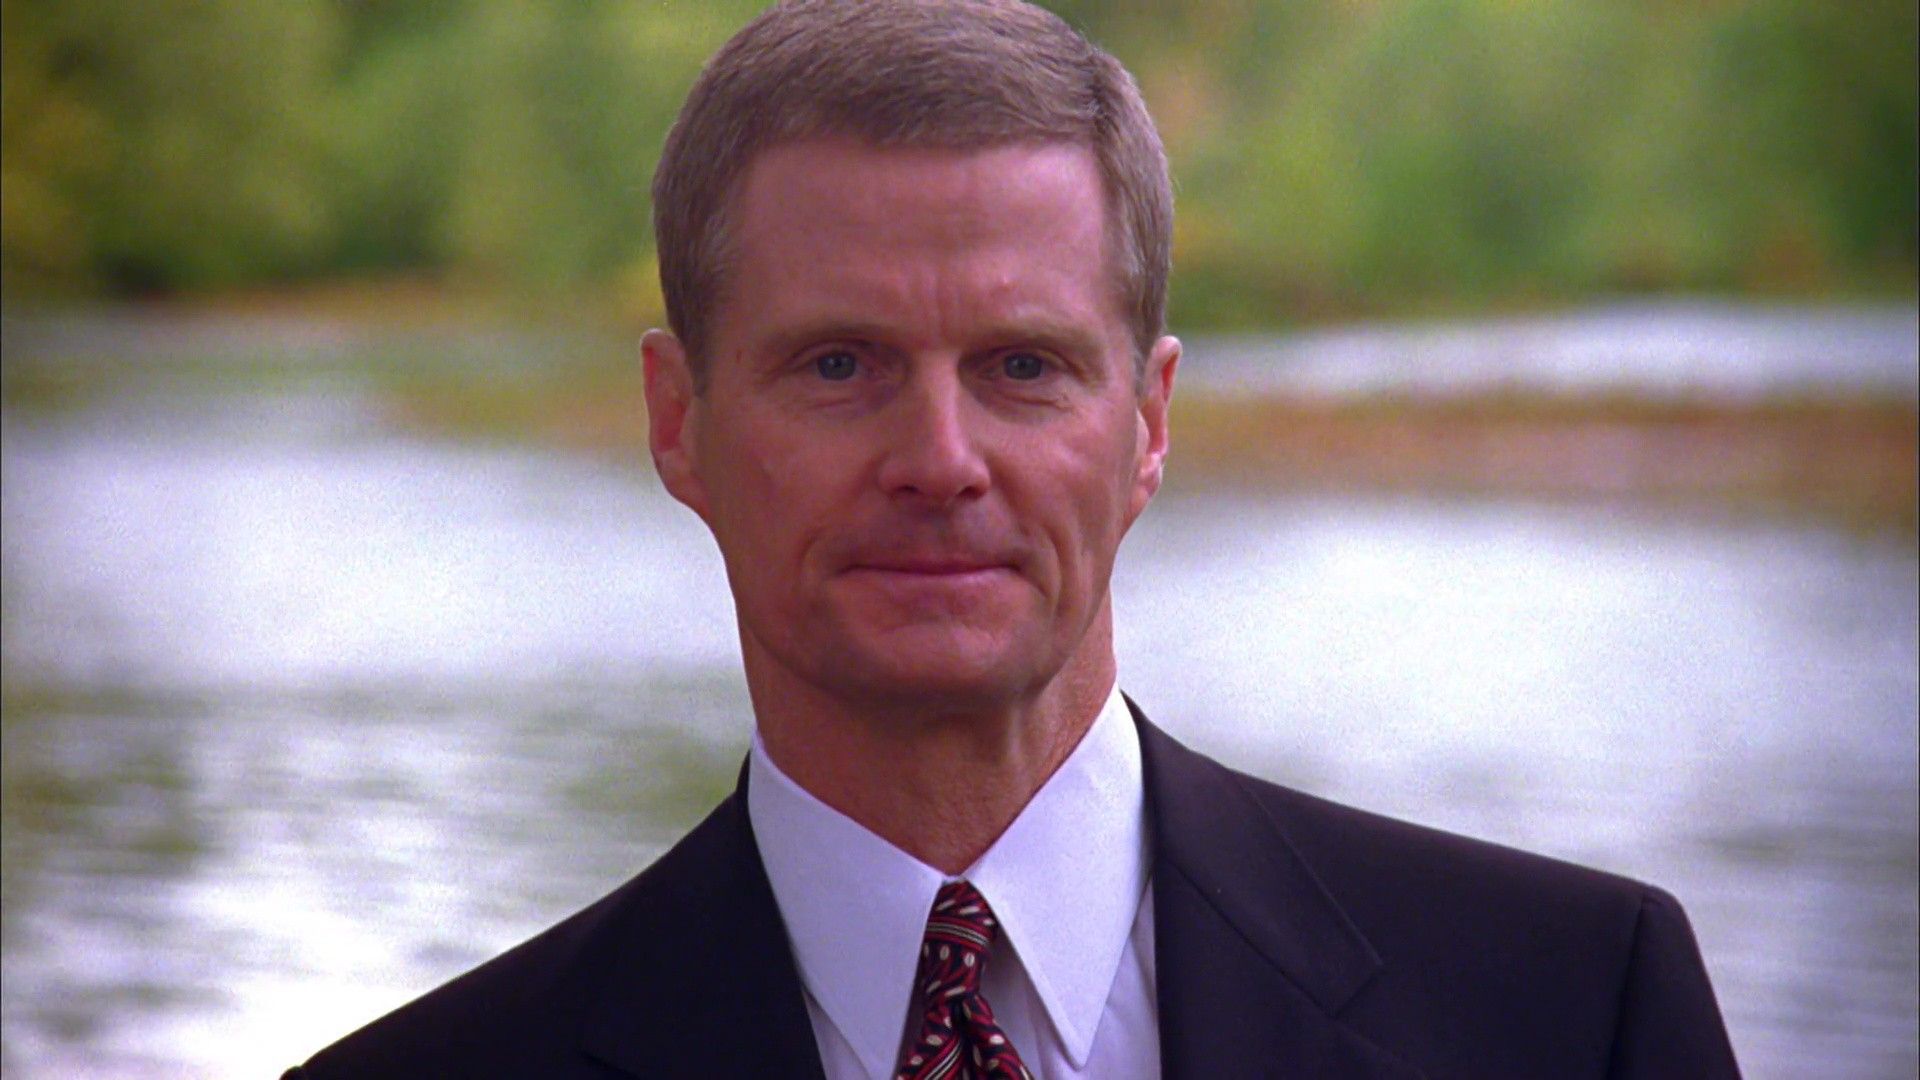 Elder David A. Bednar recounts the restoration of the priesthood and bears his apostolic testimony of the events.